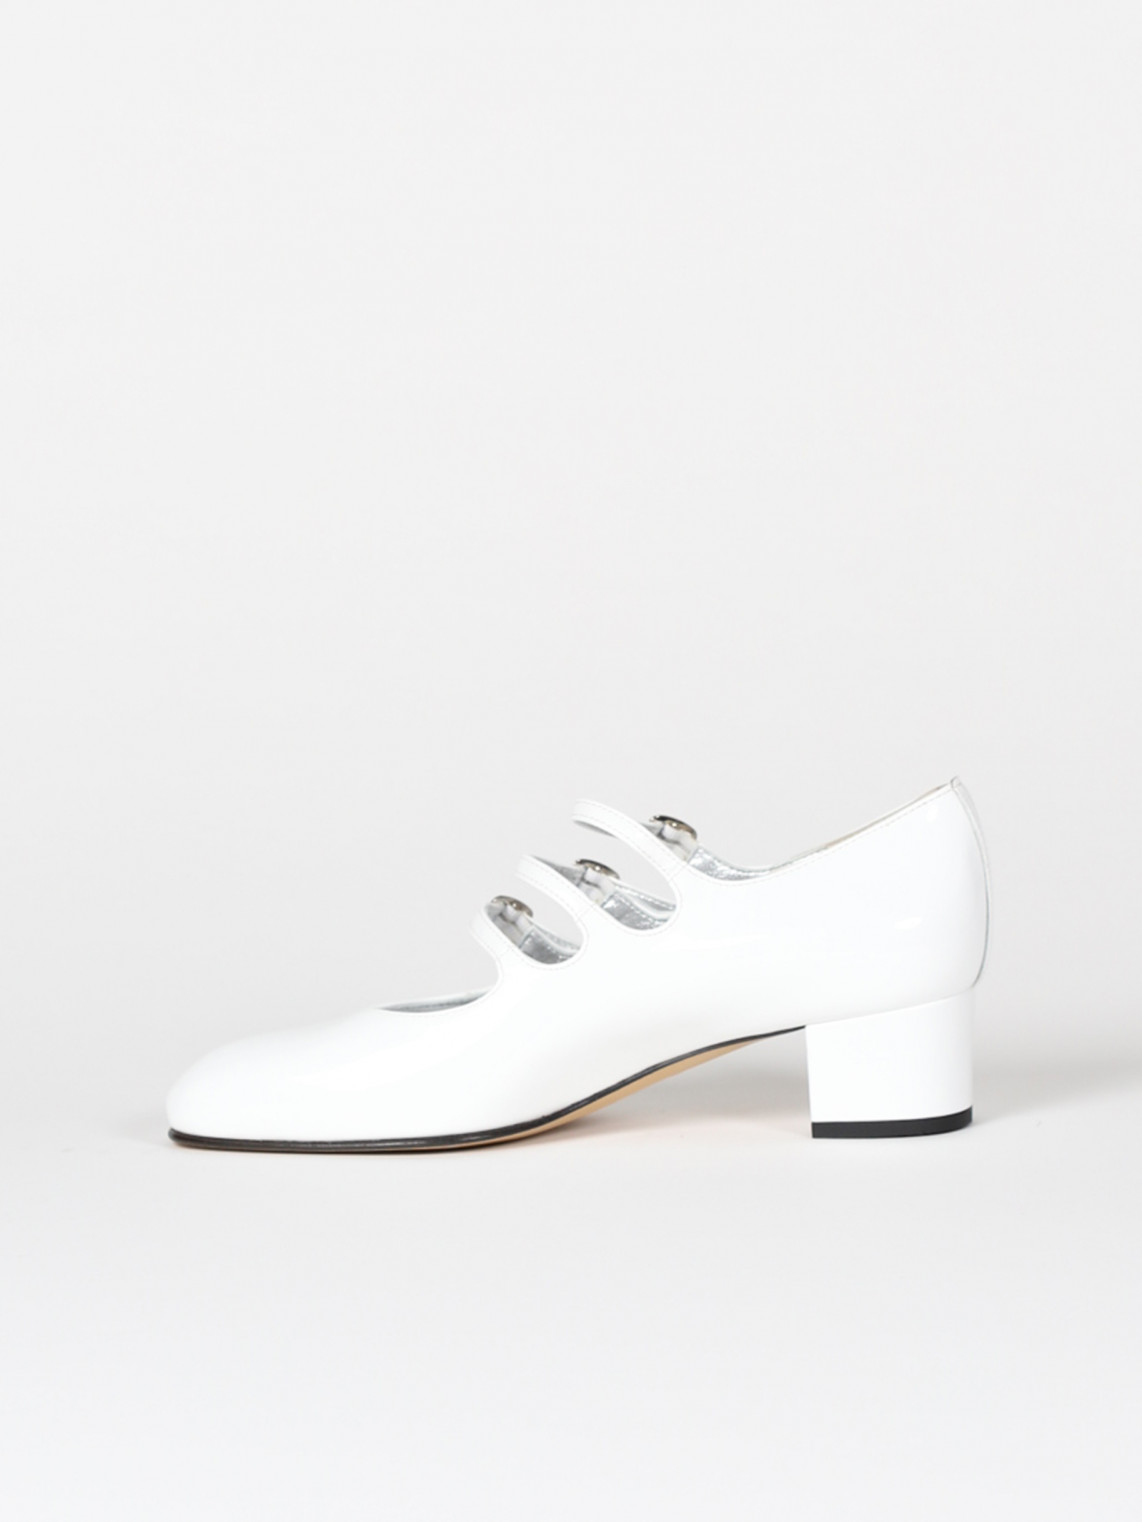 KINA white patent leather mary janes | Carel Paris Shoes